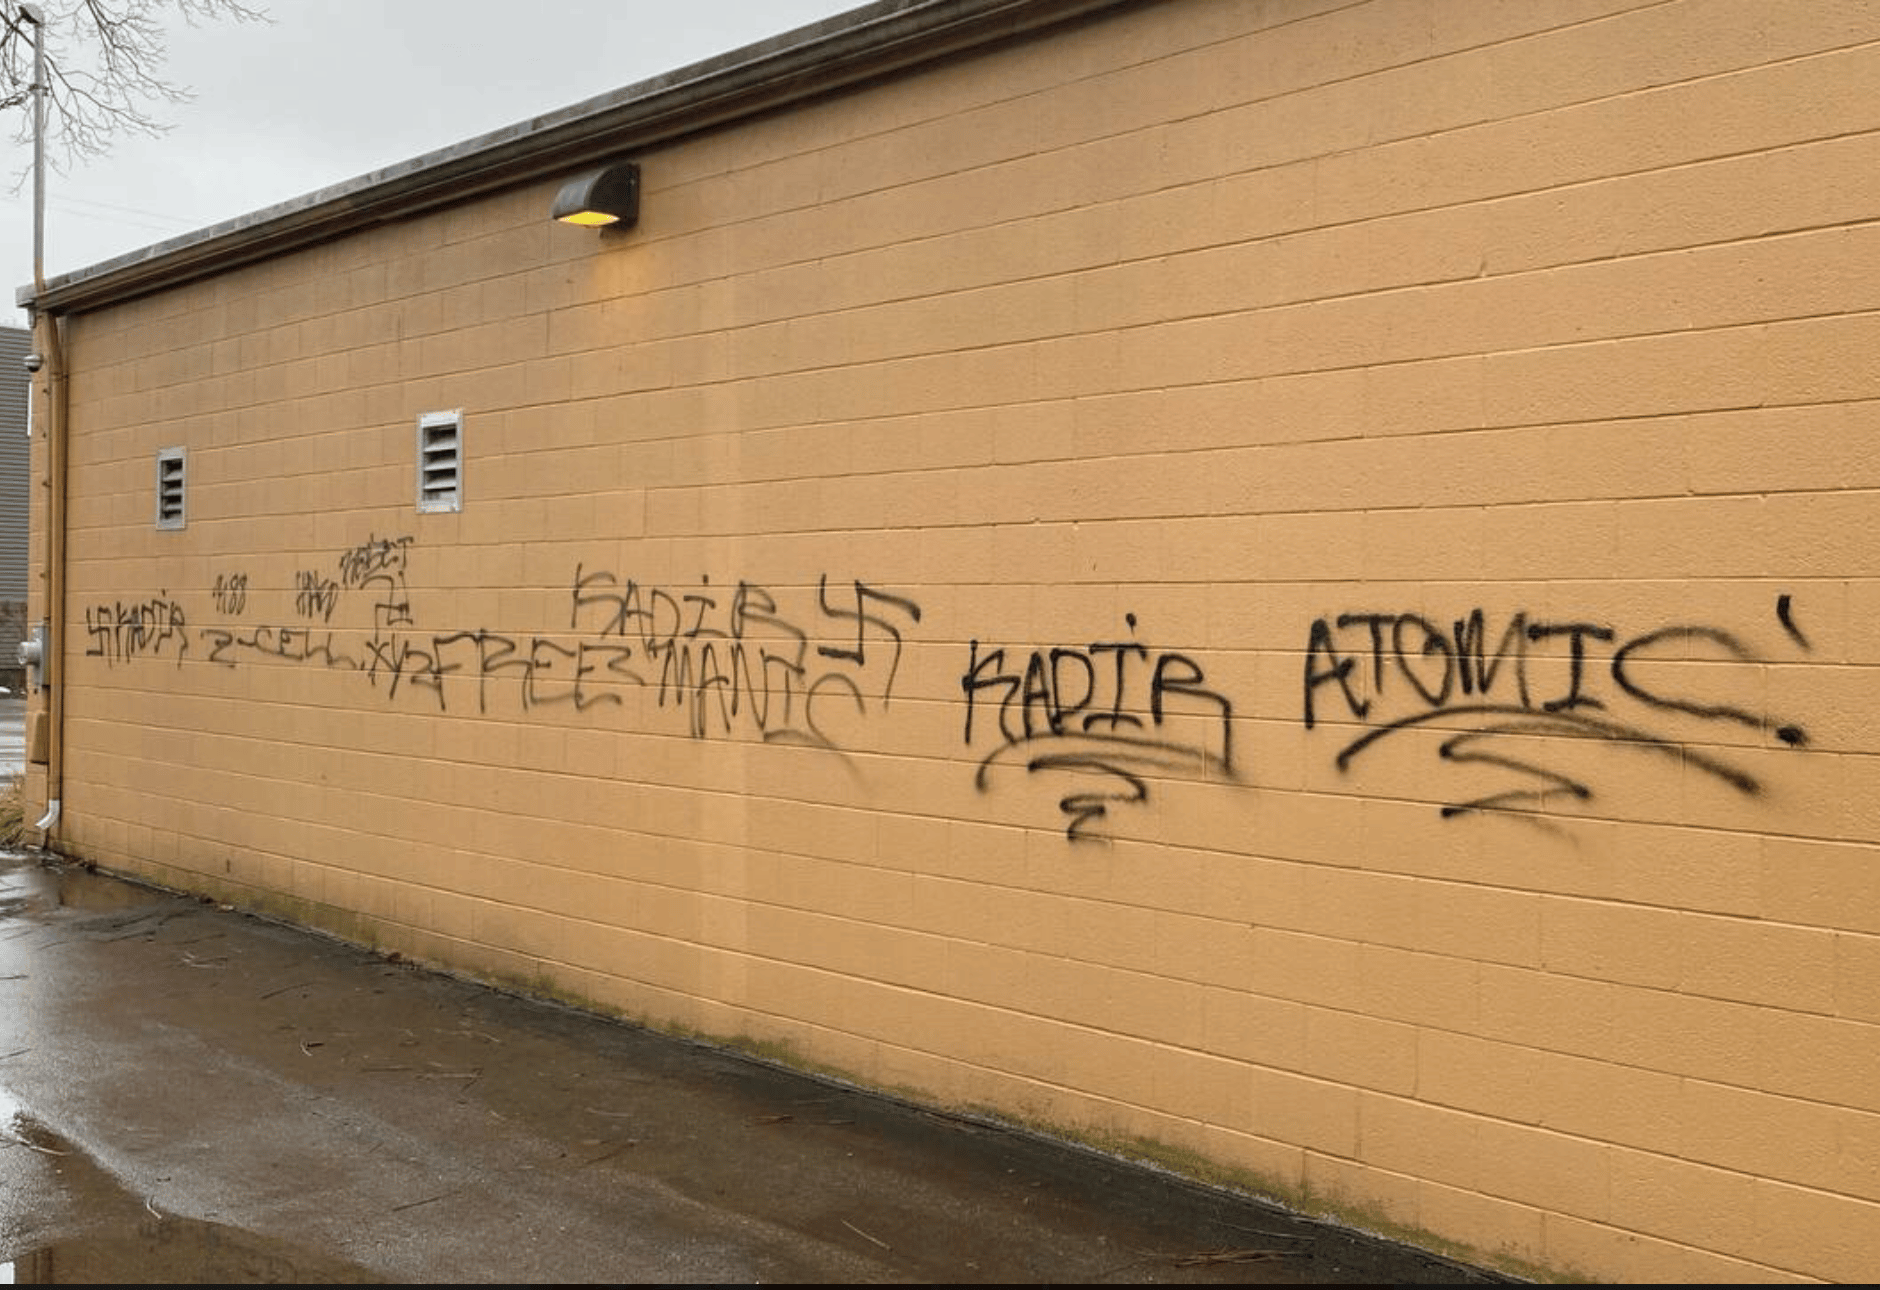 Accelerationist's Selfie Video 'Z-Cell' Film Themselves Vandalizing GOP Headquarters With Antisemitic and White Supremacist Symbols in Kent County, Grand Rapids, Michigan